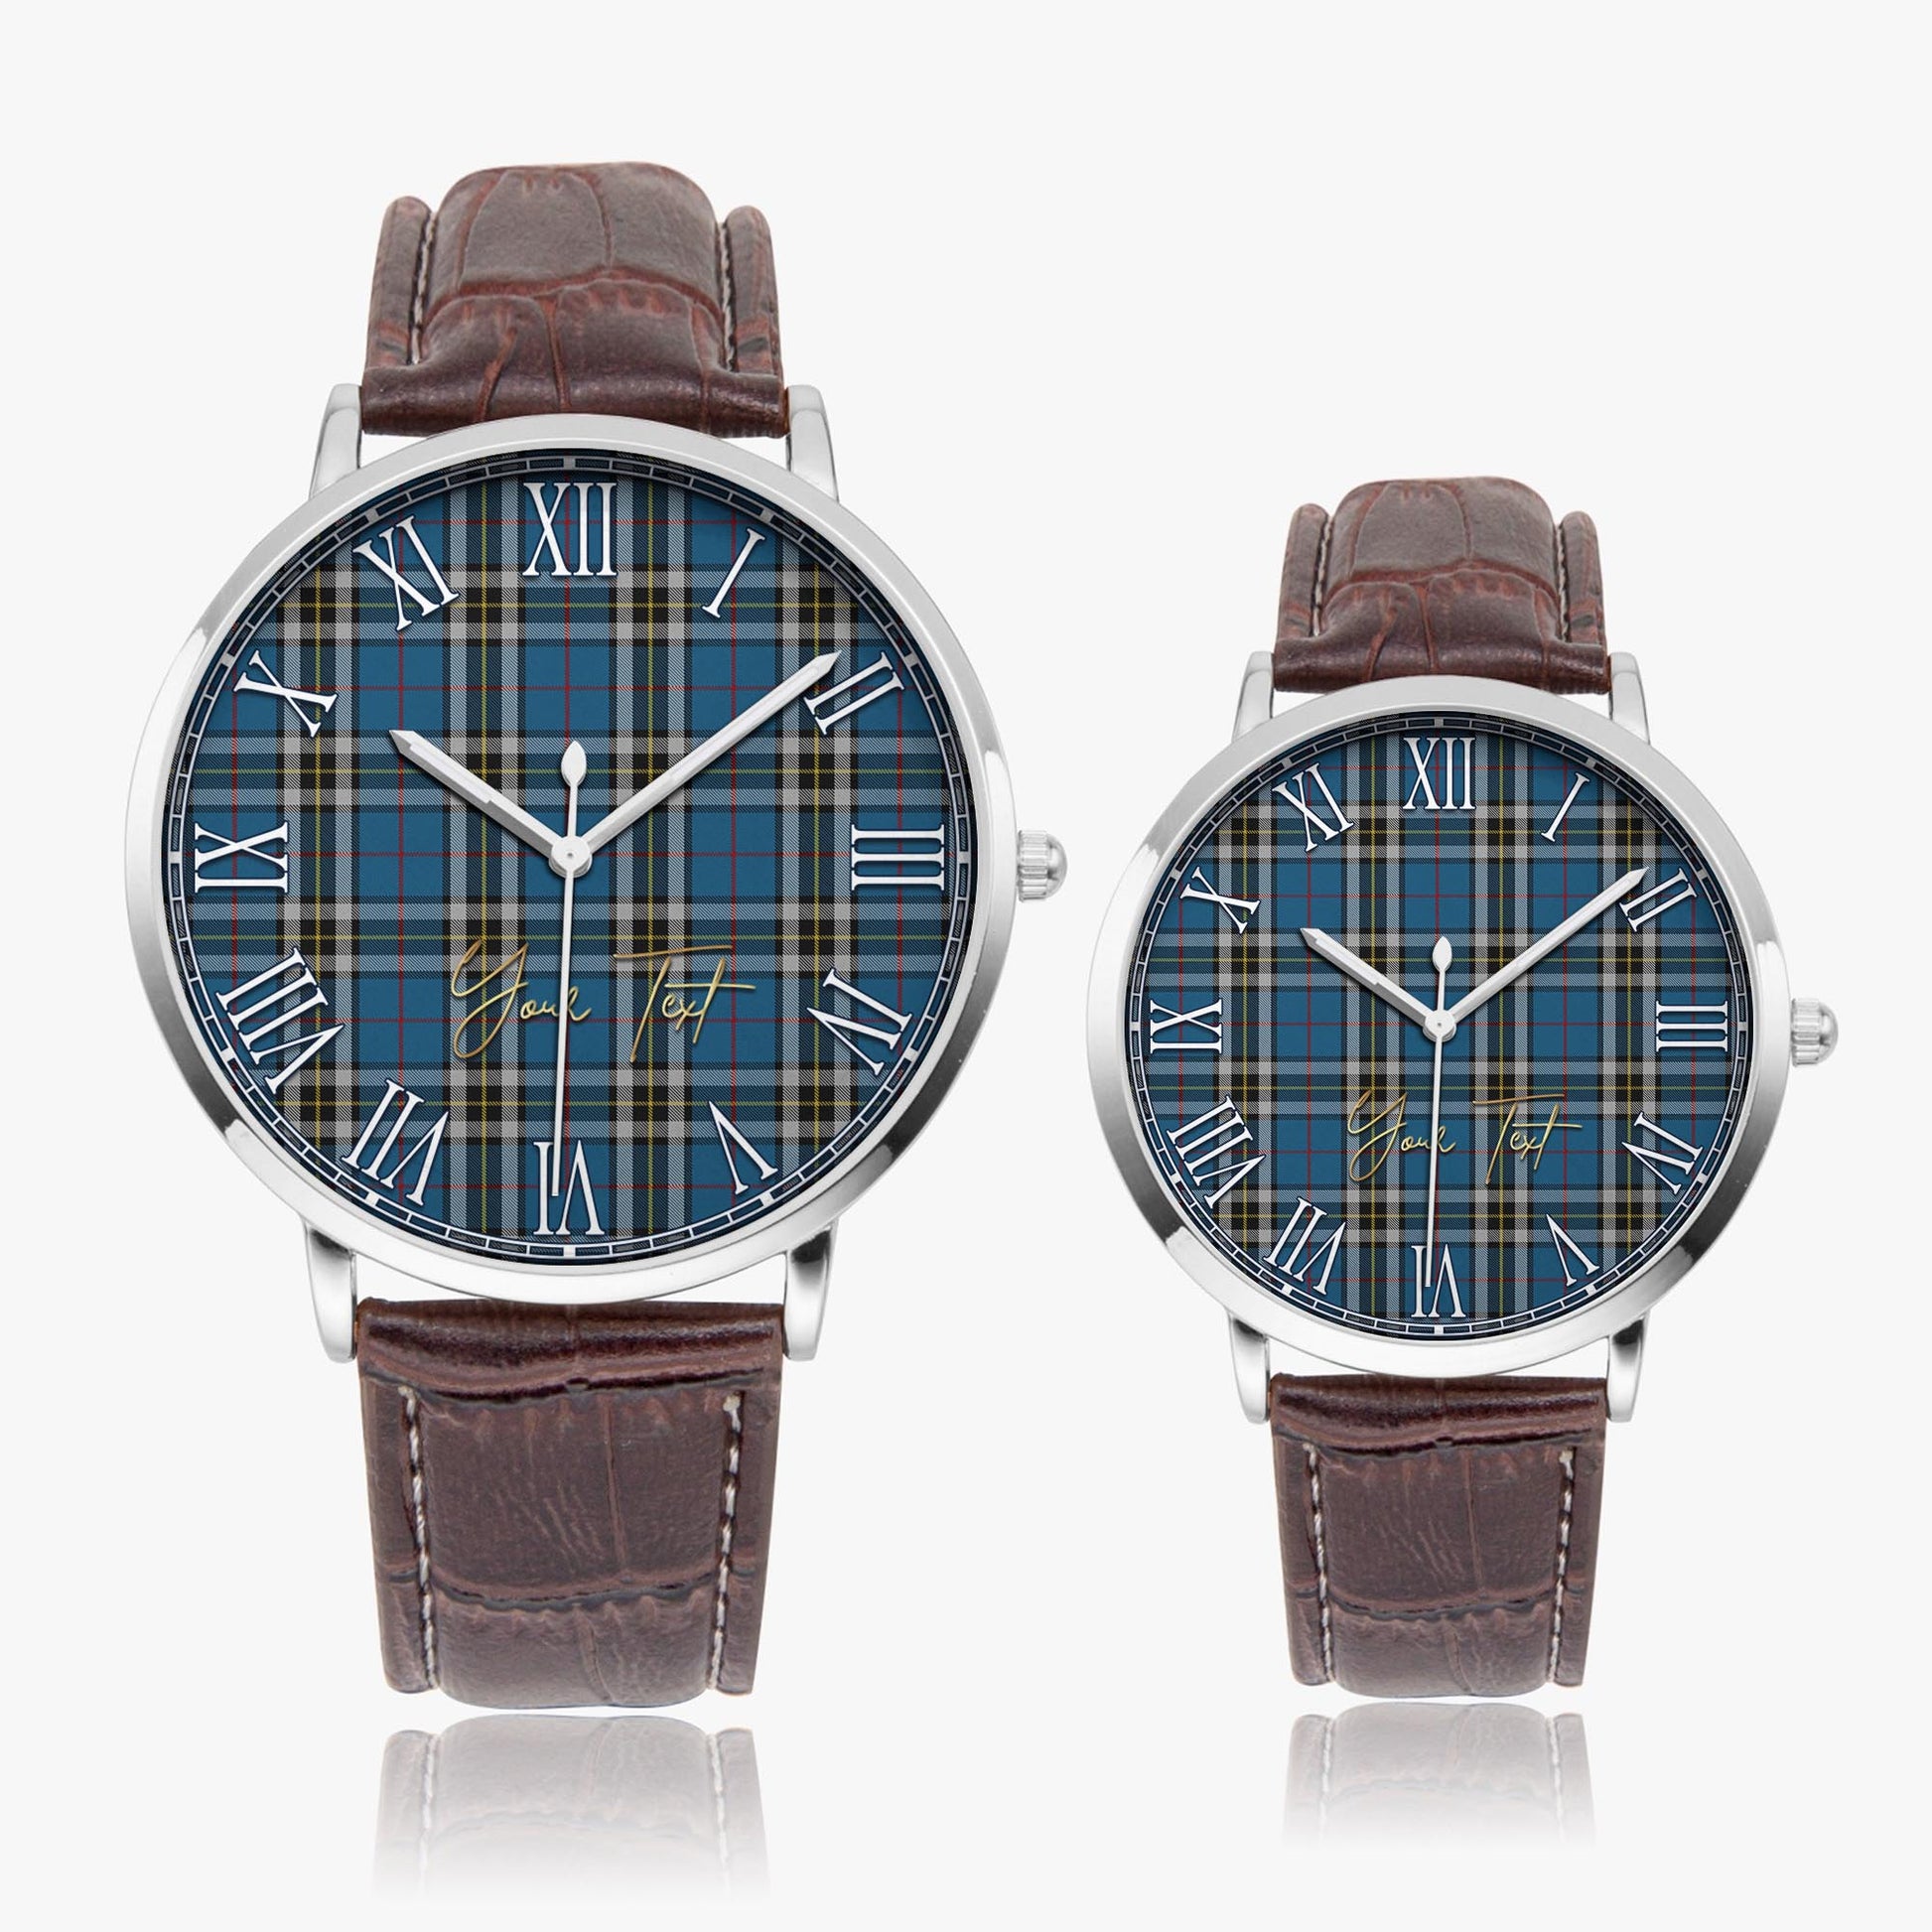 Thomson Dress Blue Tartan Personalized Your Text Leather Trap Quartz Watch Ultra Thin Silver Case With Brown Leather Strap - Tartanvibesclothing Shop